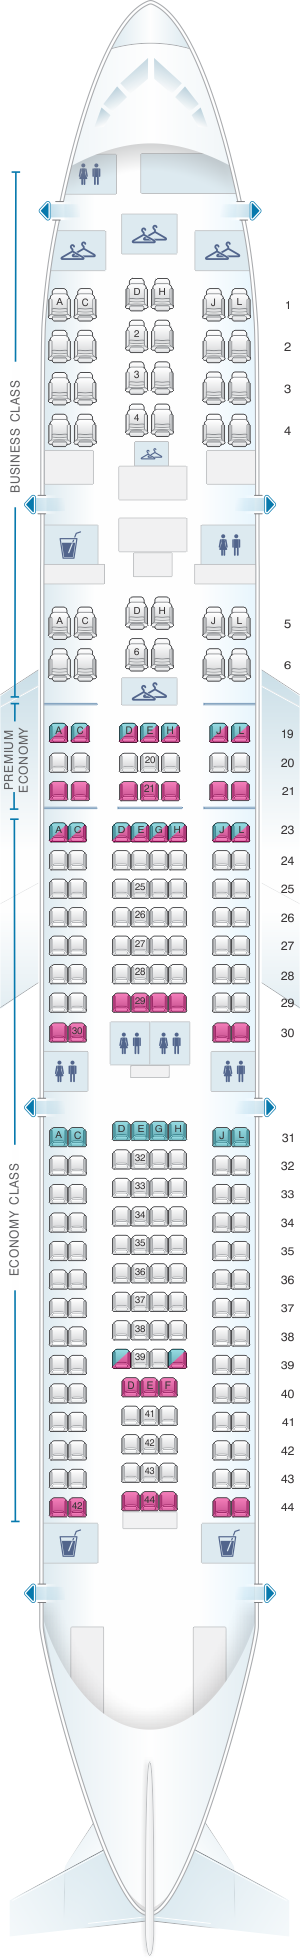 Seat map for Air France Airbus A330 200 224PAX